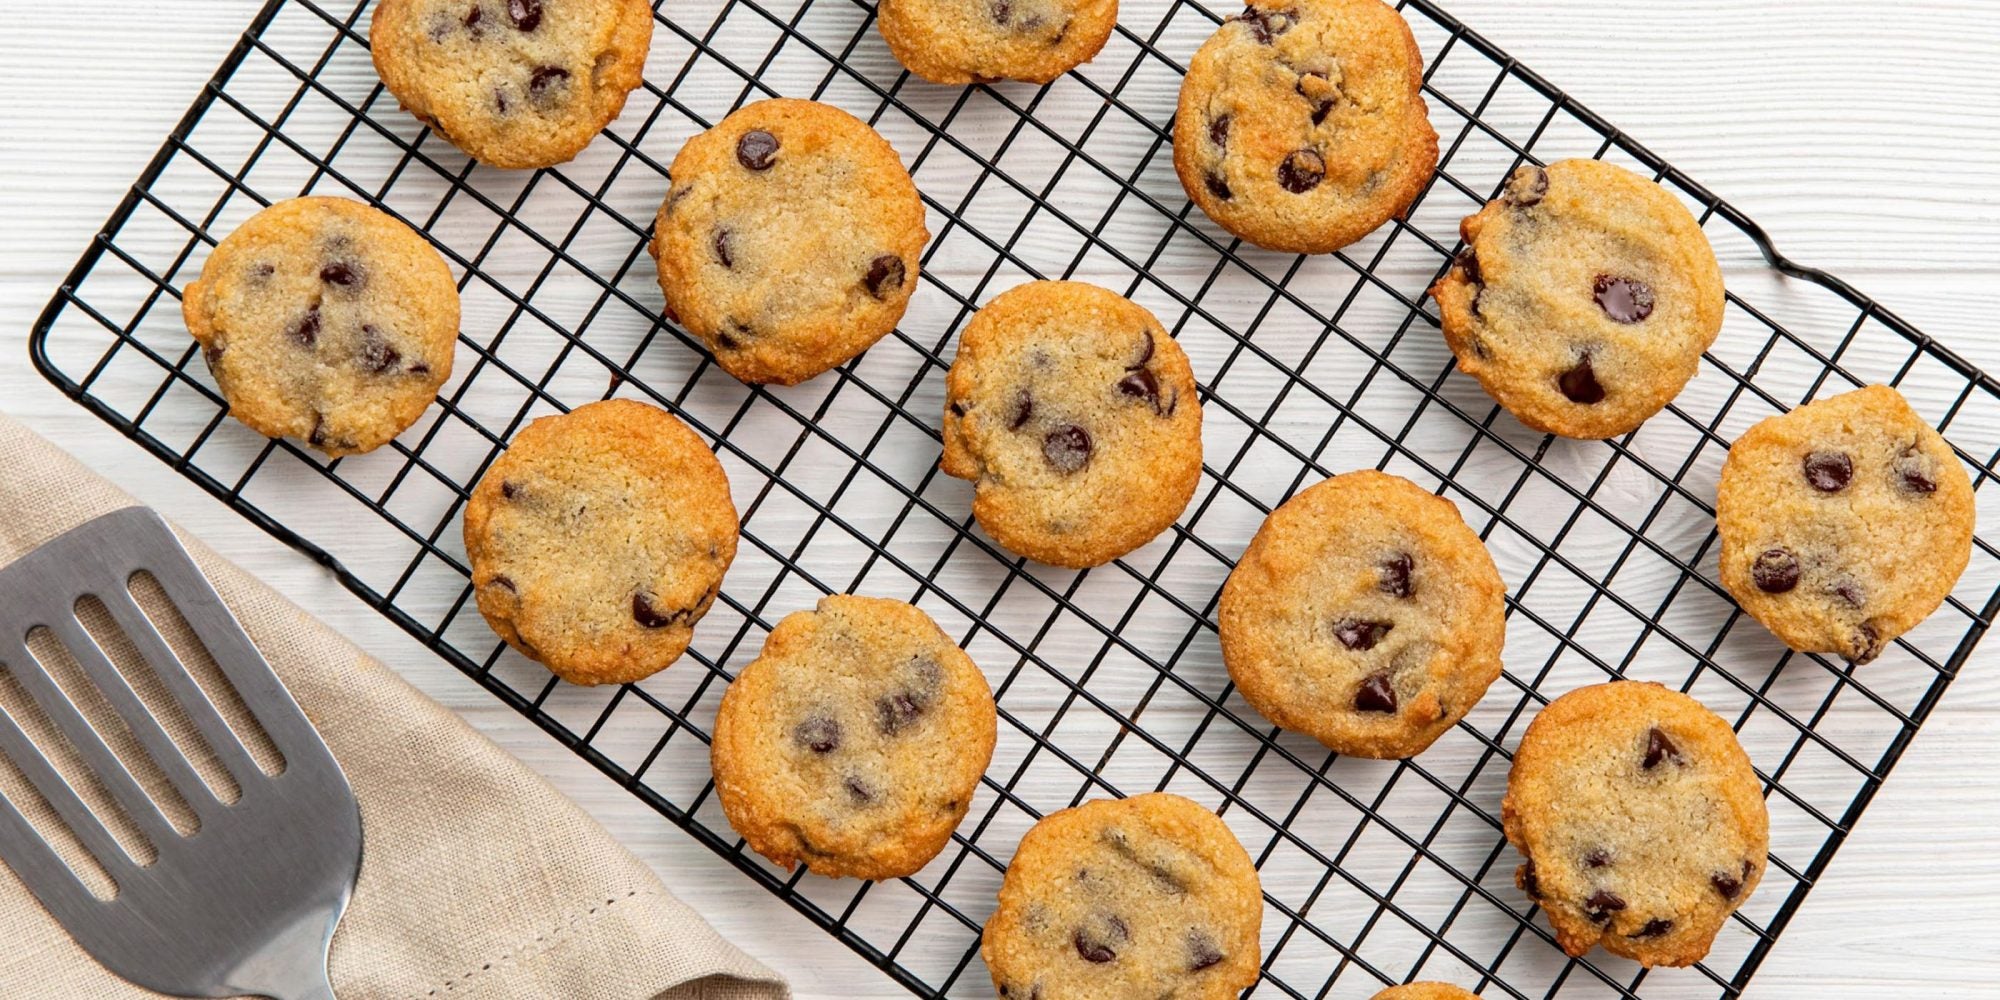 Keto Chewy Chocolate Chip Cookies